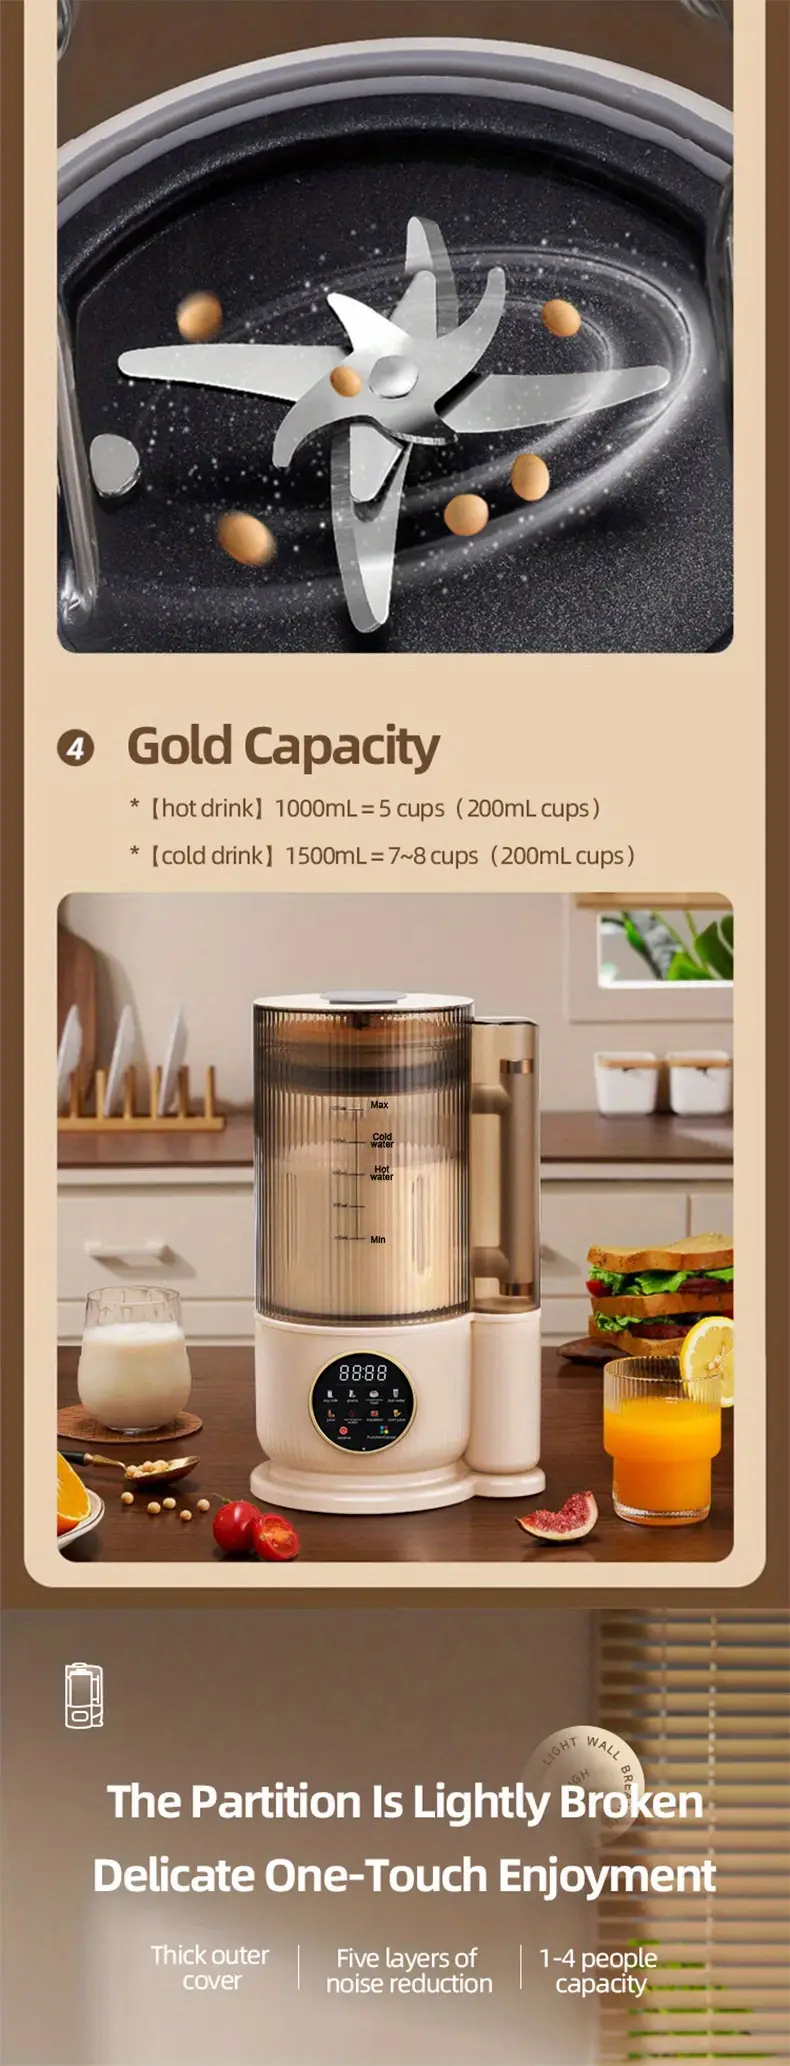 high boron glass bass blender home heating automatic soybean milk machine food supplement machine mute soft sound multi functional raw juice electromechanical electric kettle coffee pot with soundproof cover 1500ml large capacity for 2 8 persons details 3